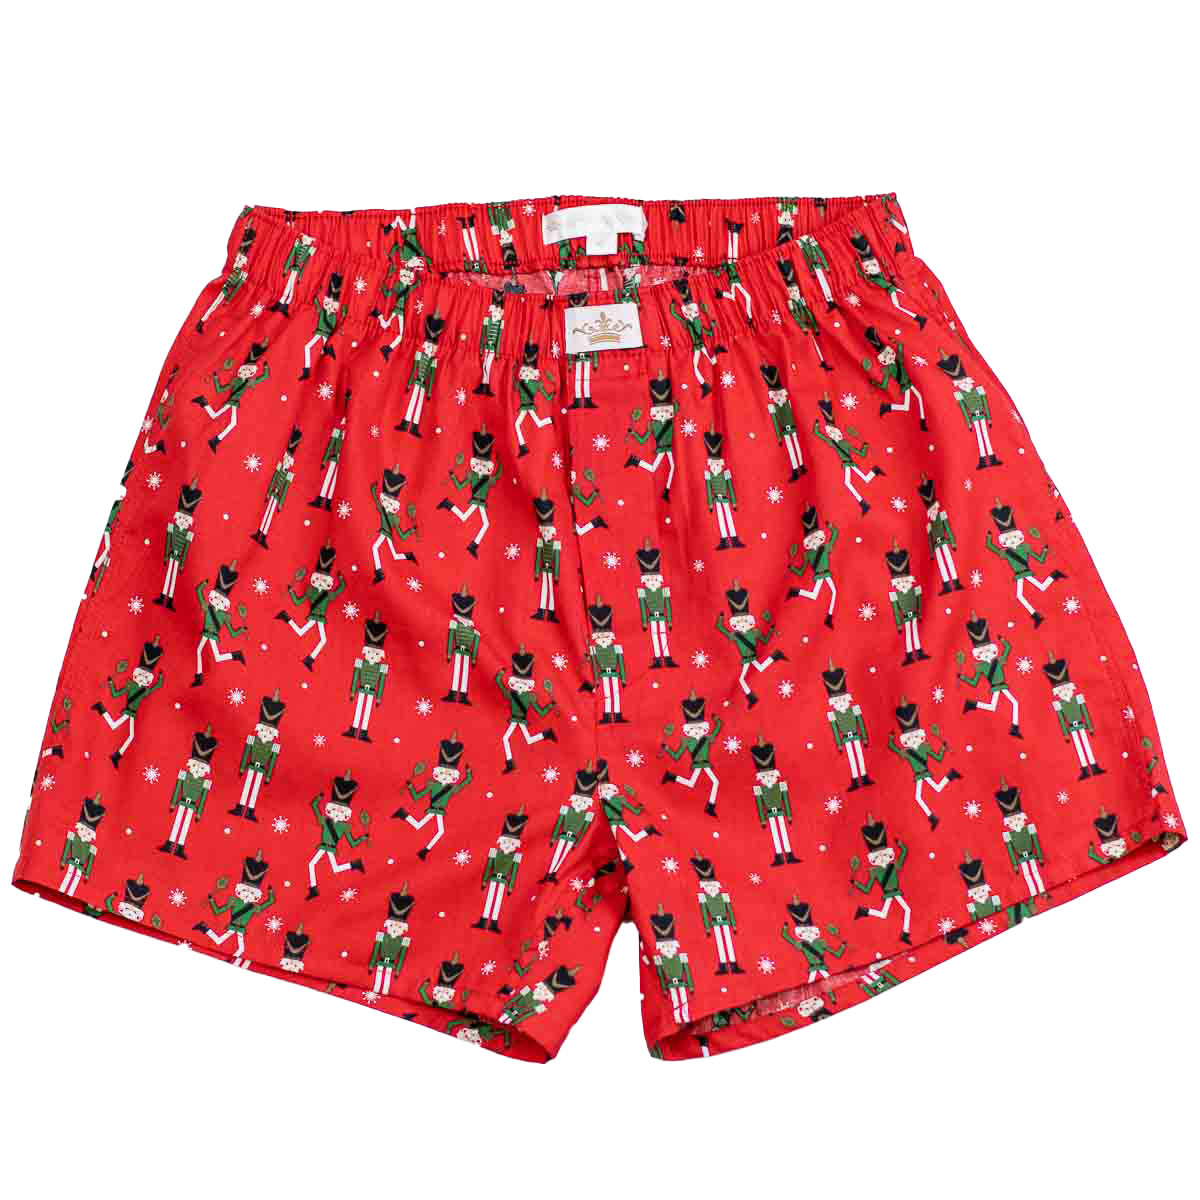 Men's Holiday Boxers